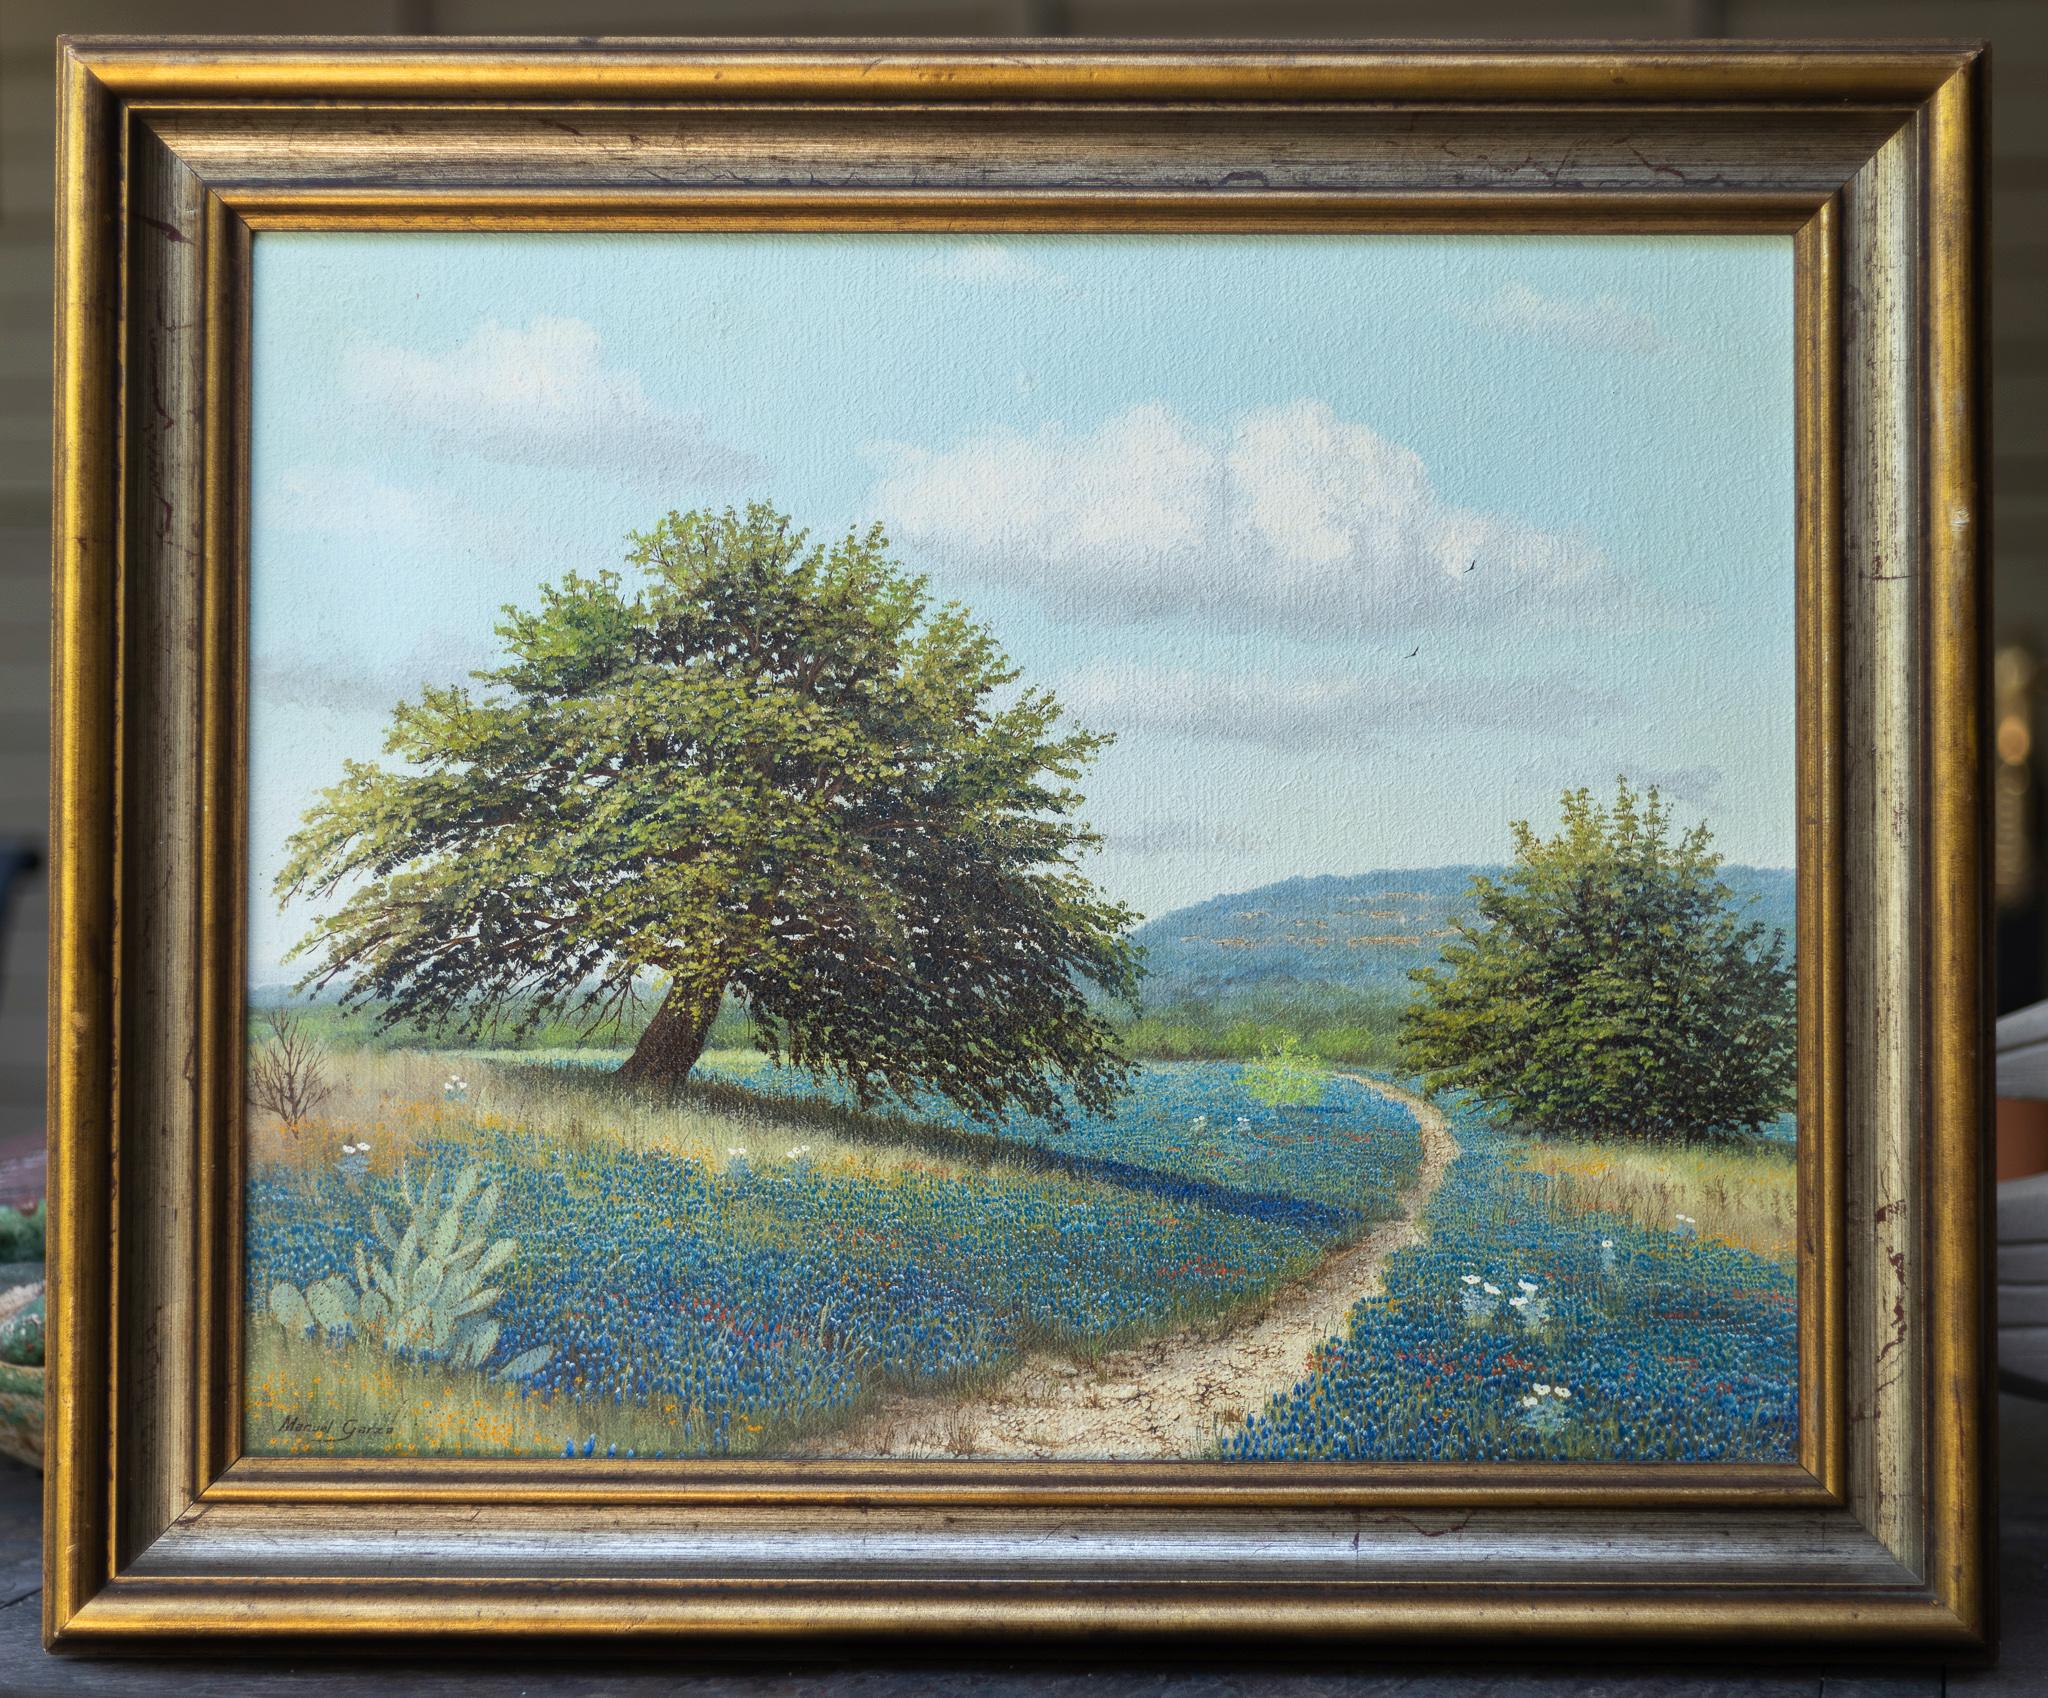 Untitled Landscape Hillcountry Bluebonnets - Painting by Manuel Garza